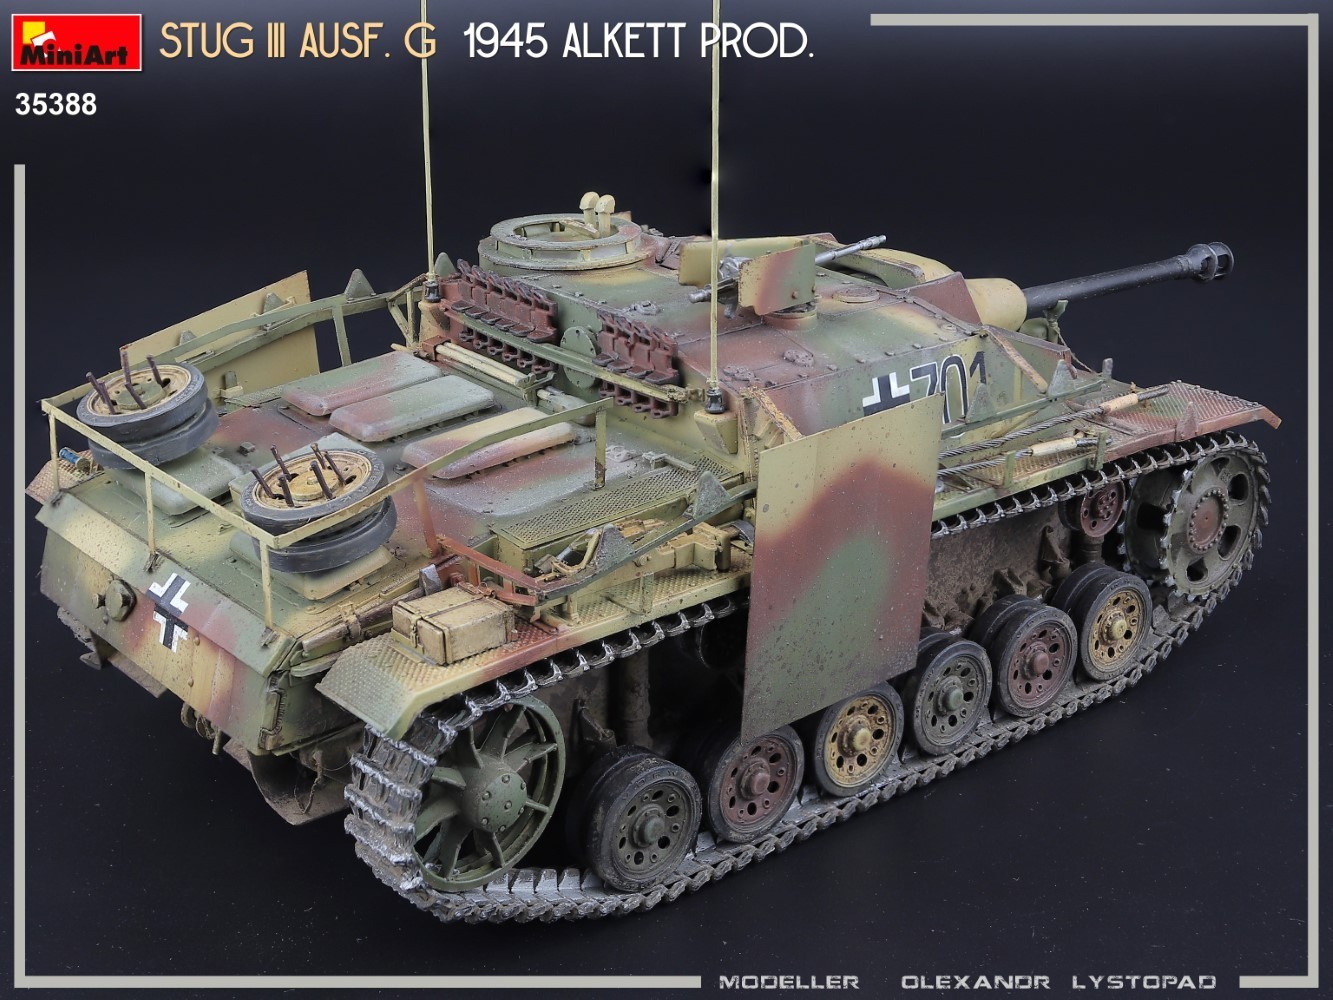 MiniArt to Release Highly Detailed 1/35 StuG III Ausf. G 1945 Alkett Prod. Model Kit Painting and Marking-17